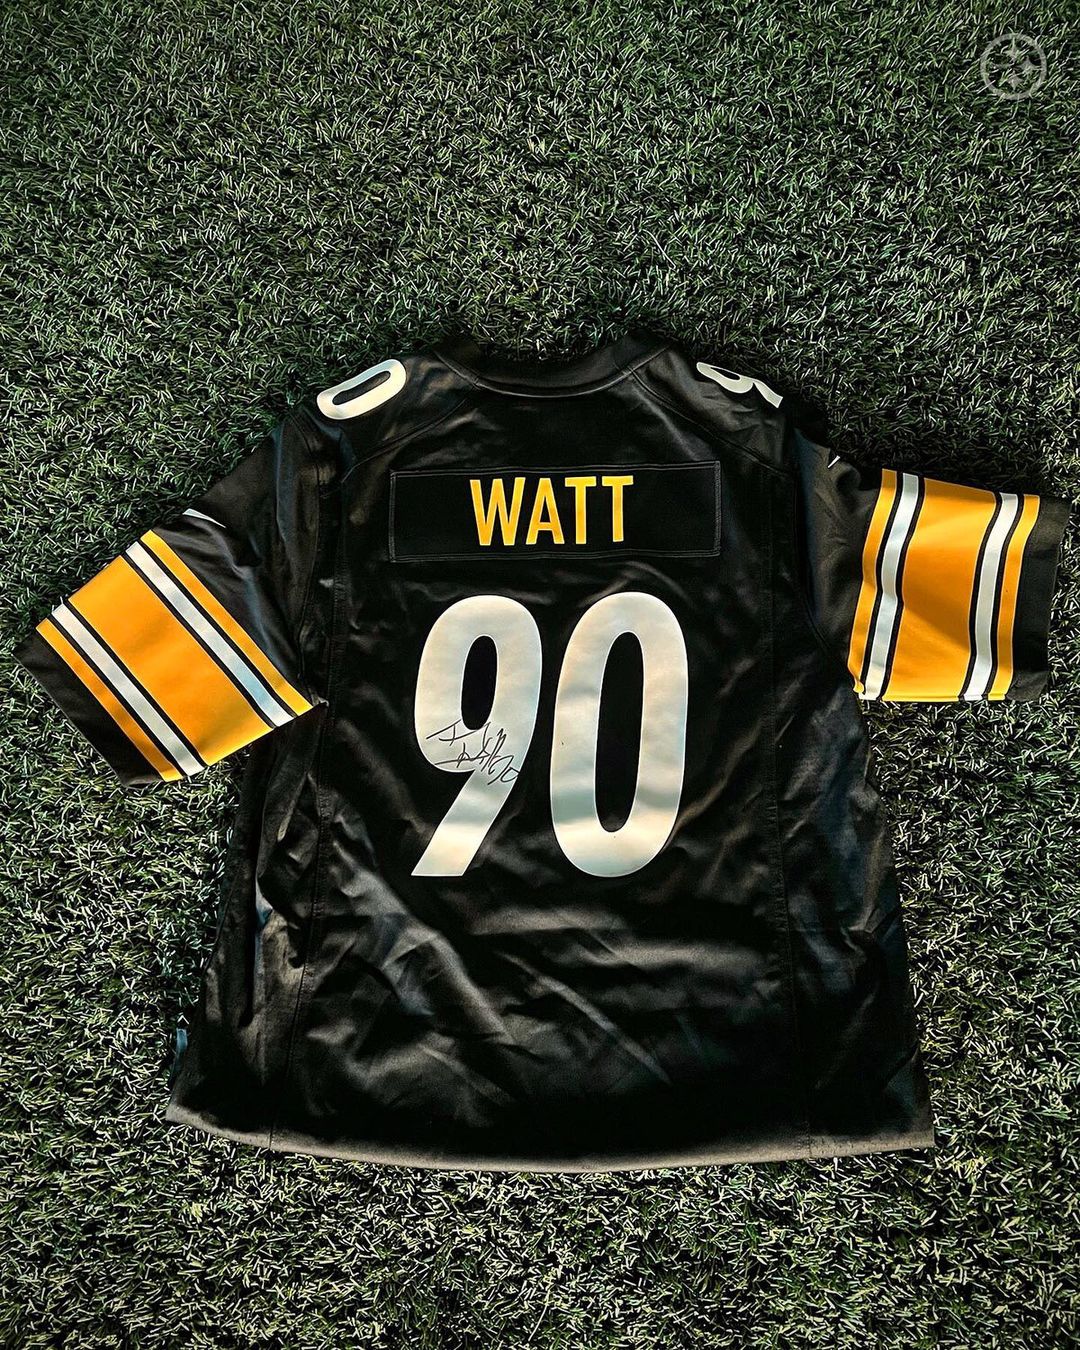 Who wants a @tjwatt90 signed jersey
Like this photo + tag a friend for the chanc...